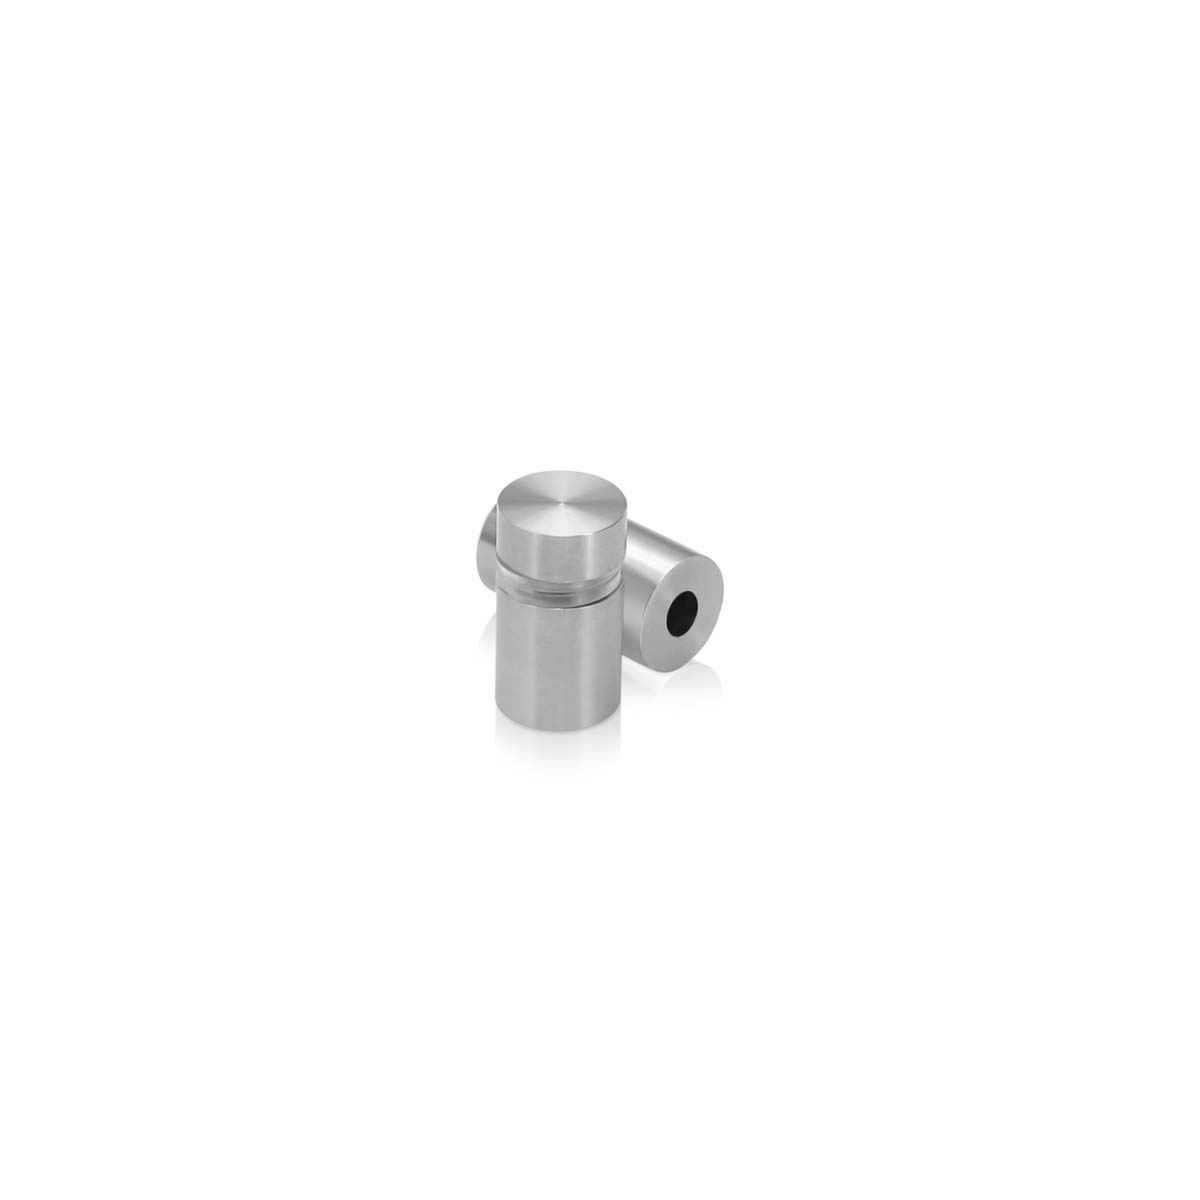 1/2'' Diameter X 1/2'' Barrel Length, Hollow Stainless Steel Brushed Finish. Easy Fasten Standoff (For Inside Use Only) [Required Material Hole Size: 3/8'']